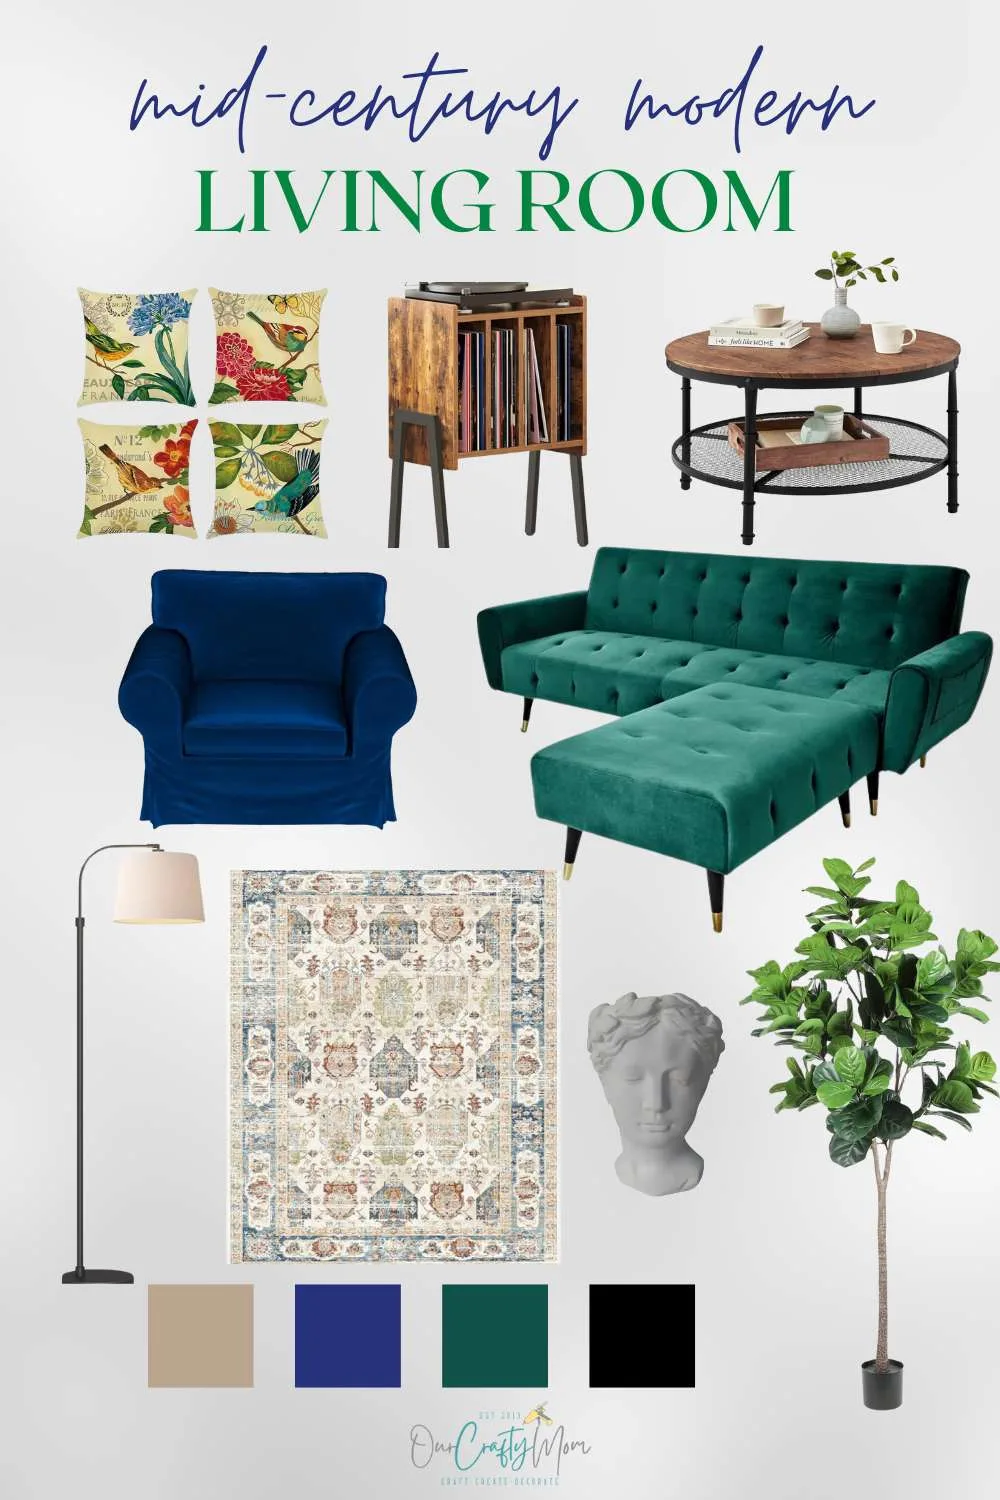 mood board with cozy living room decor.